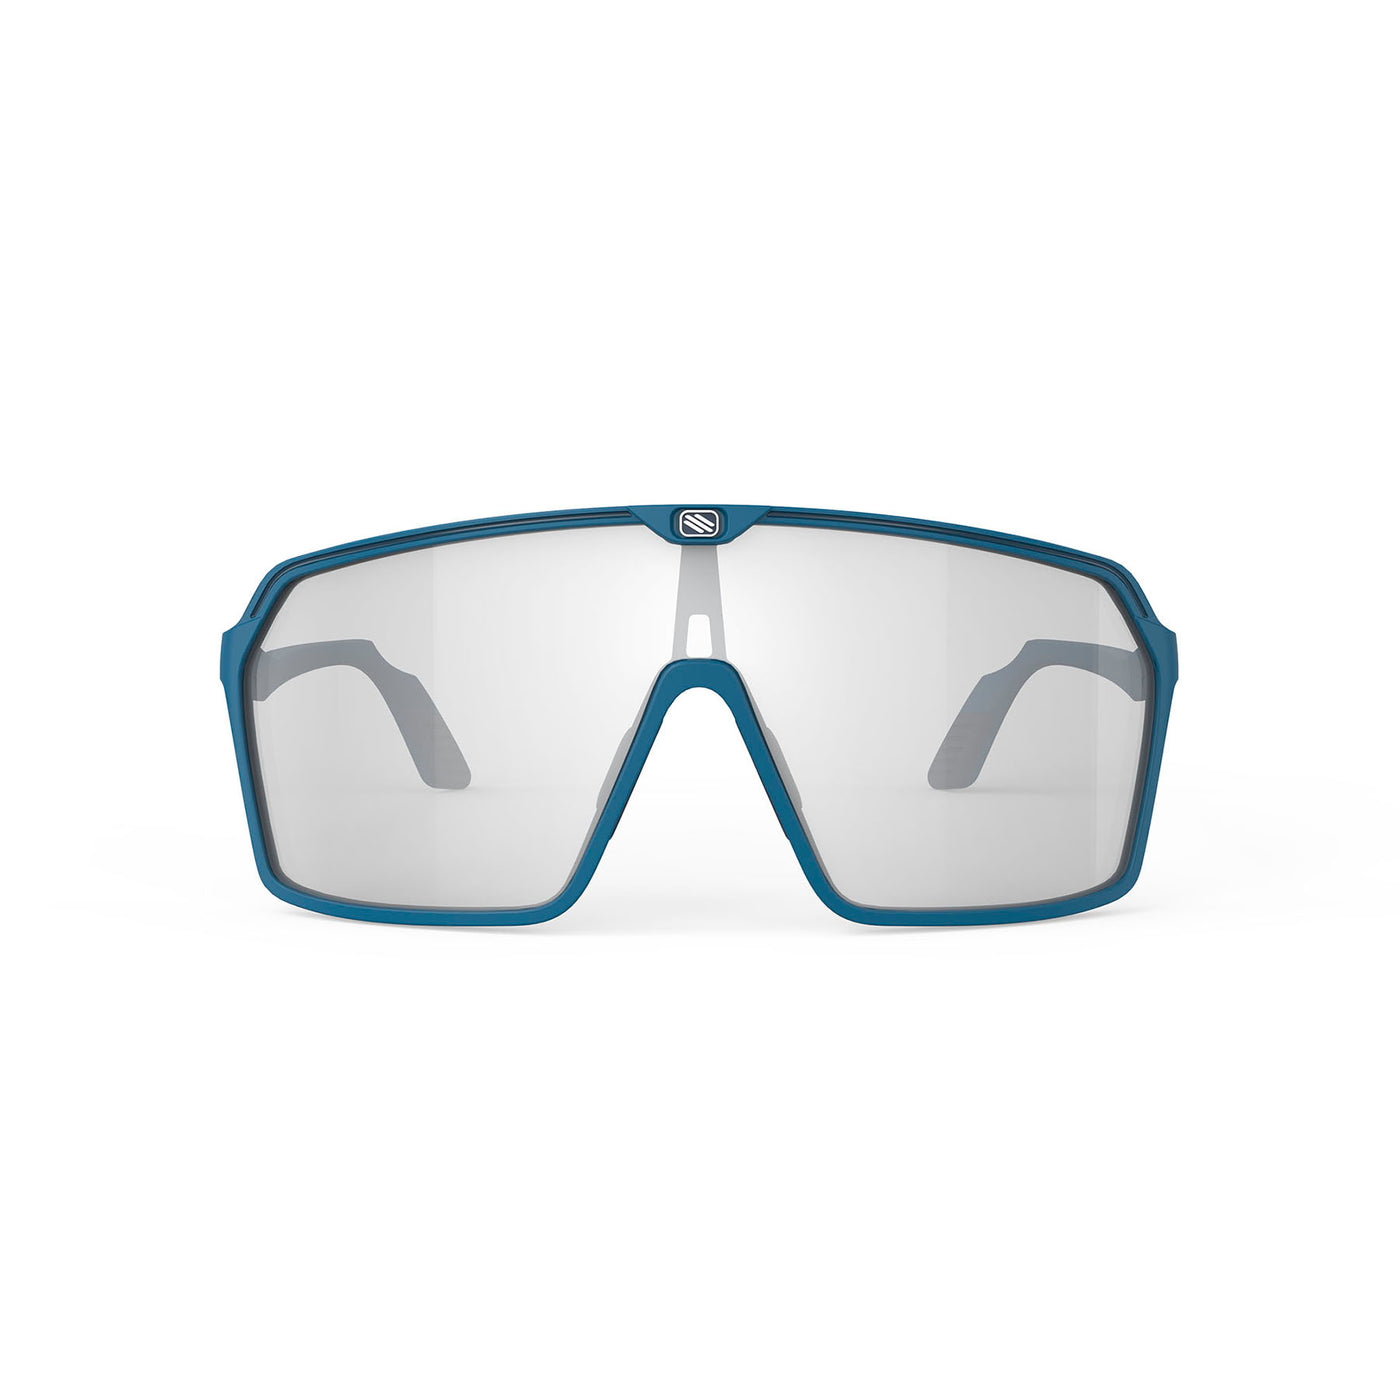 Rudy Project running and cycling sunglasses#color_spinshield-pacific-blue-matte-with-impactx-photochromic-2-laser-black-lenses